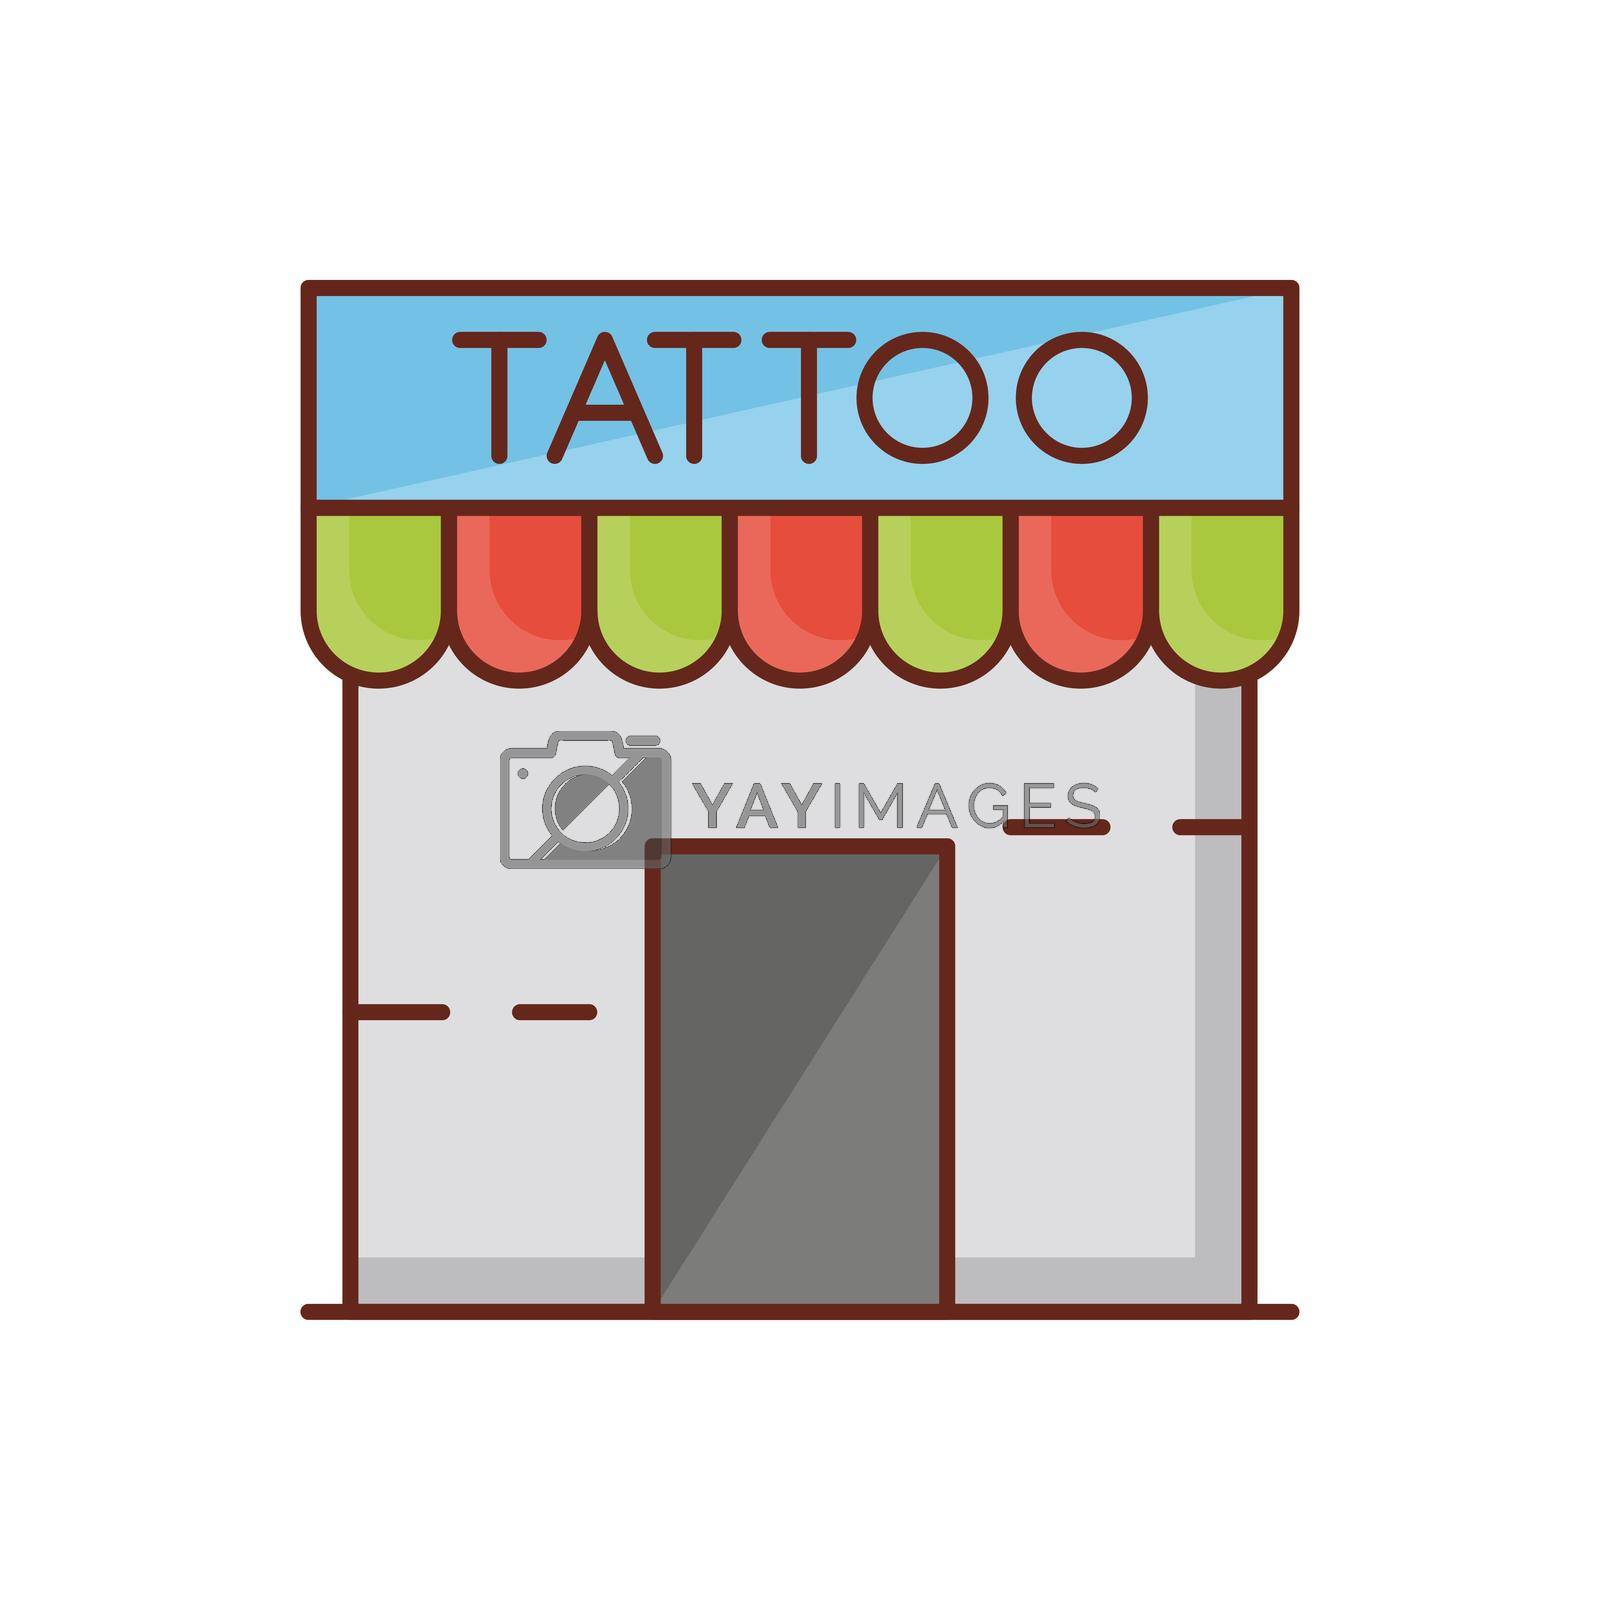 Royalty free image of tattoo  by FlaticonsDesign